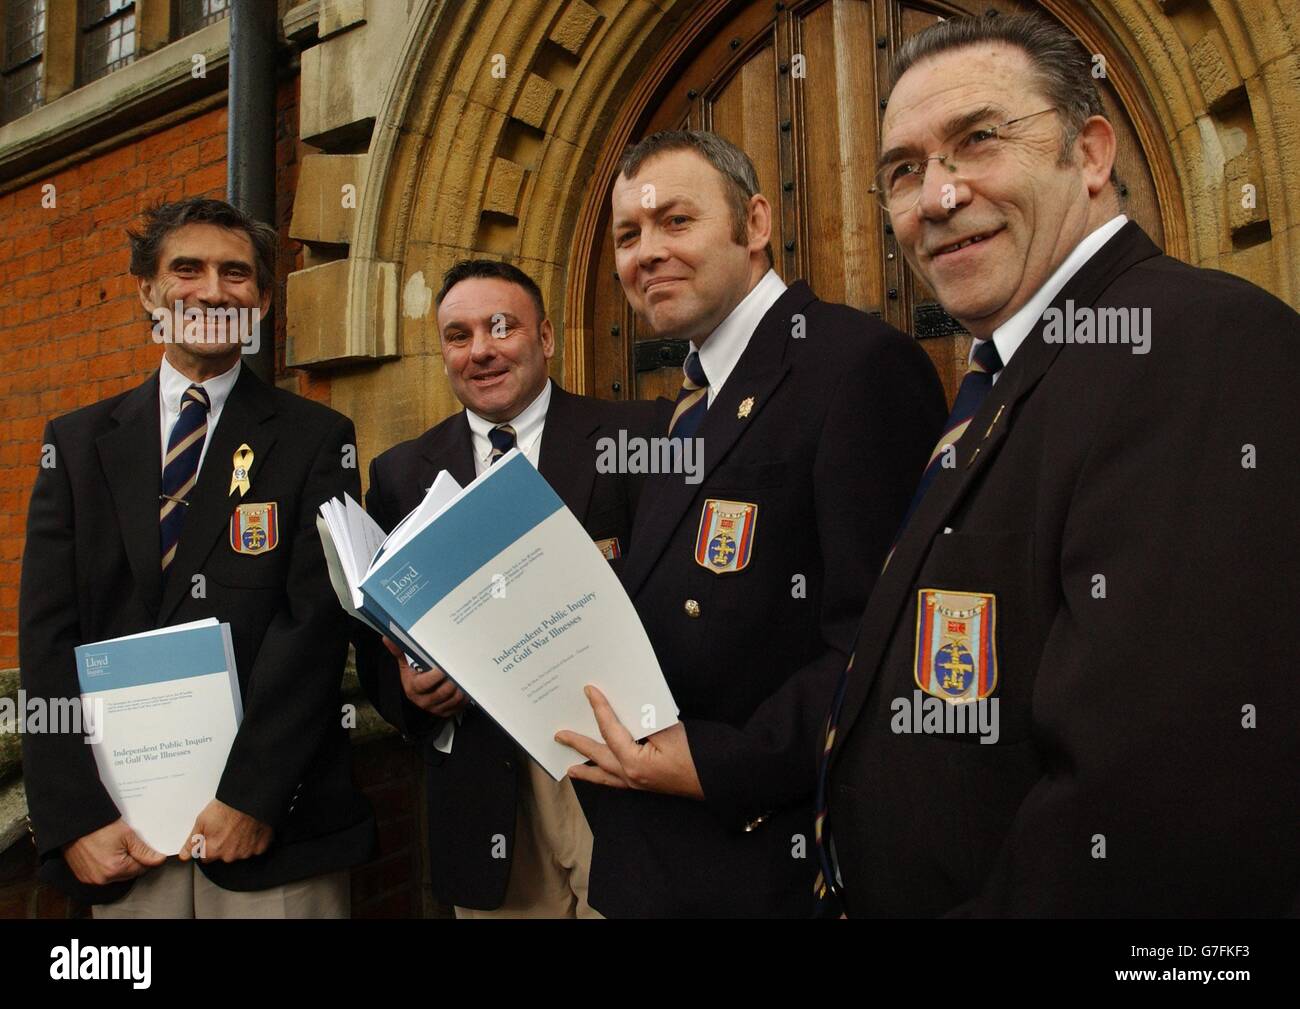 Gulf War 1 veterans, in Westminster after Lord Lloyd of Berwick presented his report on the alleged 'Gulf War Syndrome' experienced by military personnel following the conflict. They are, from left to right, Tony Flint, 57, Shaun Rusling, 45, Noel Baker, 38, and Charles Plumridge, 64. Stock Photo